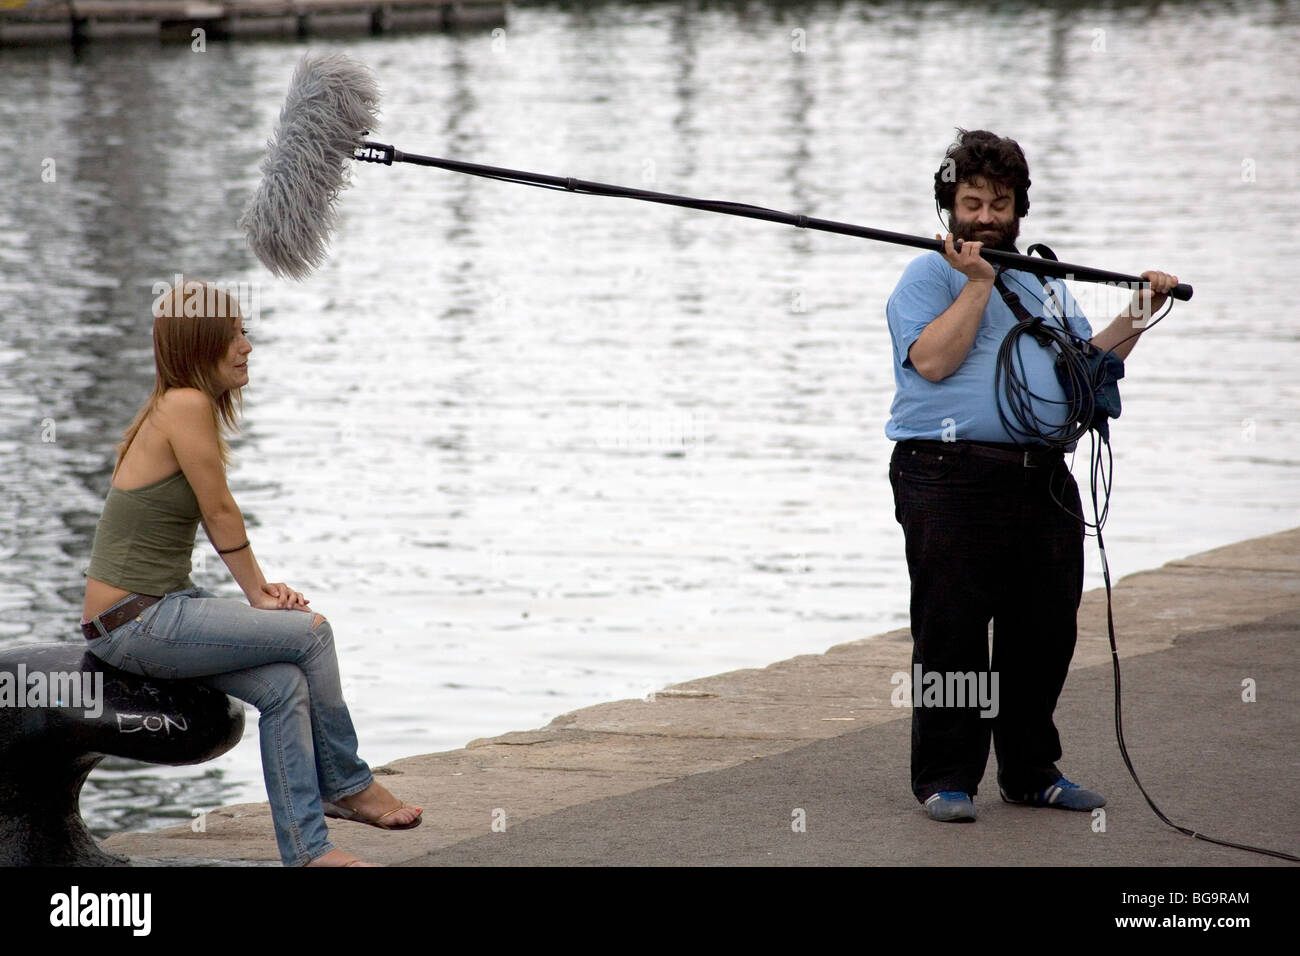 TV SHOW, OUTSIDE BROADCAST, SOUND BOOM: TV crew outside broadcast harbour sound boom microphone presenter in Barcelona Harbour Spain Stock Photo